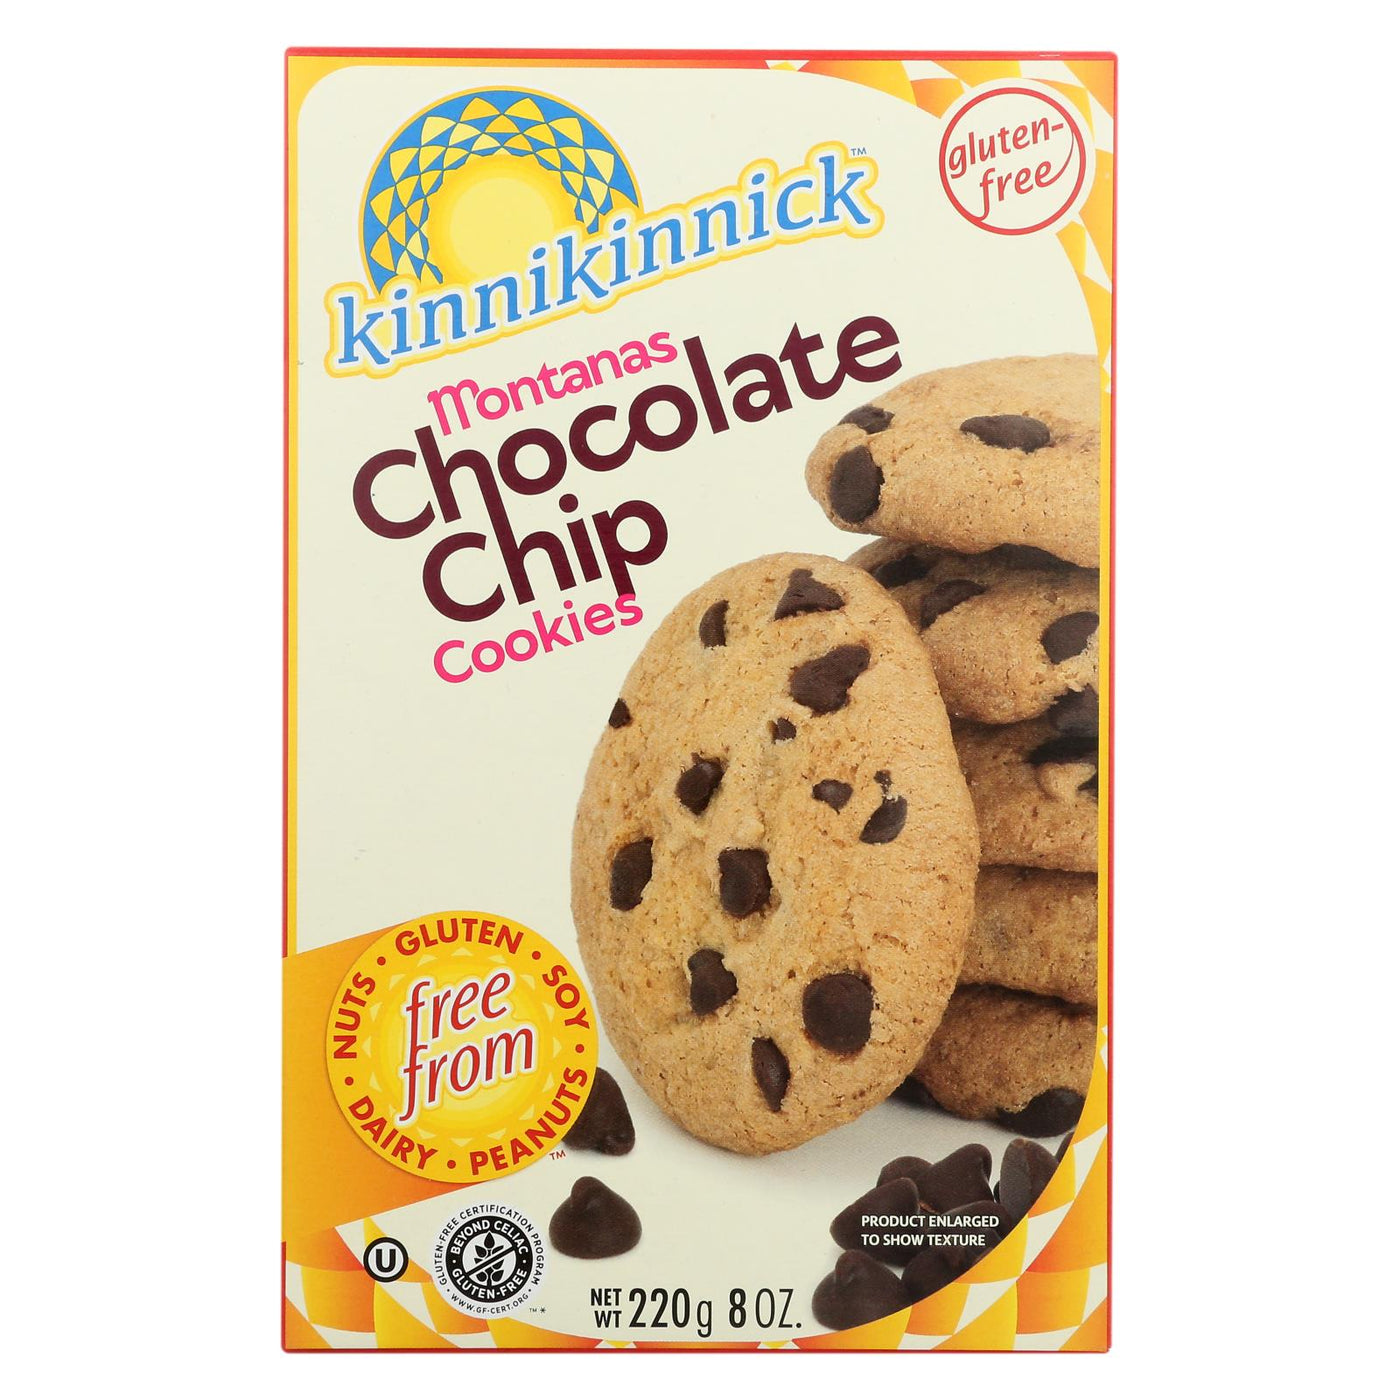 Kinnikinnick Cookies - Chocolate Chip - Case Of 6 - 8 Oz. | OnlyNaturals.us